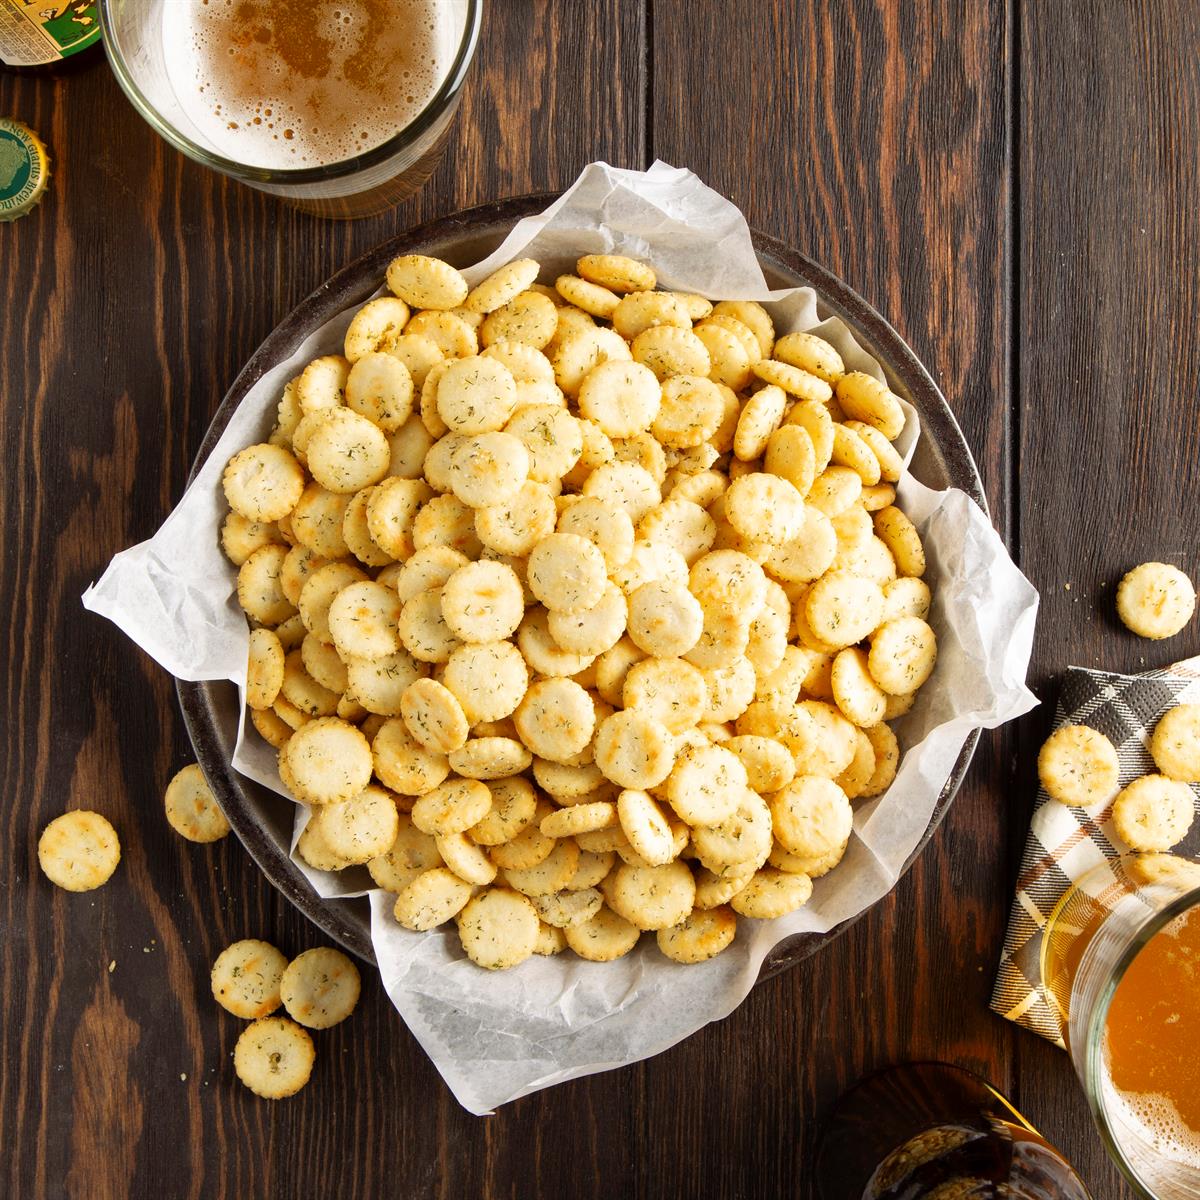 Ranch Oyster Crackers_image